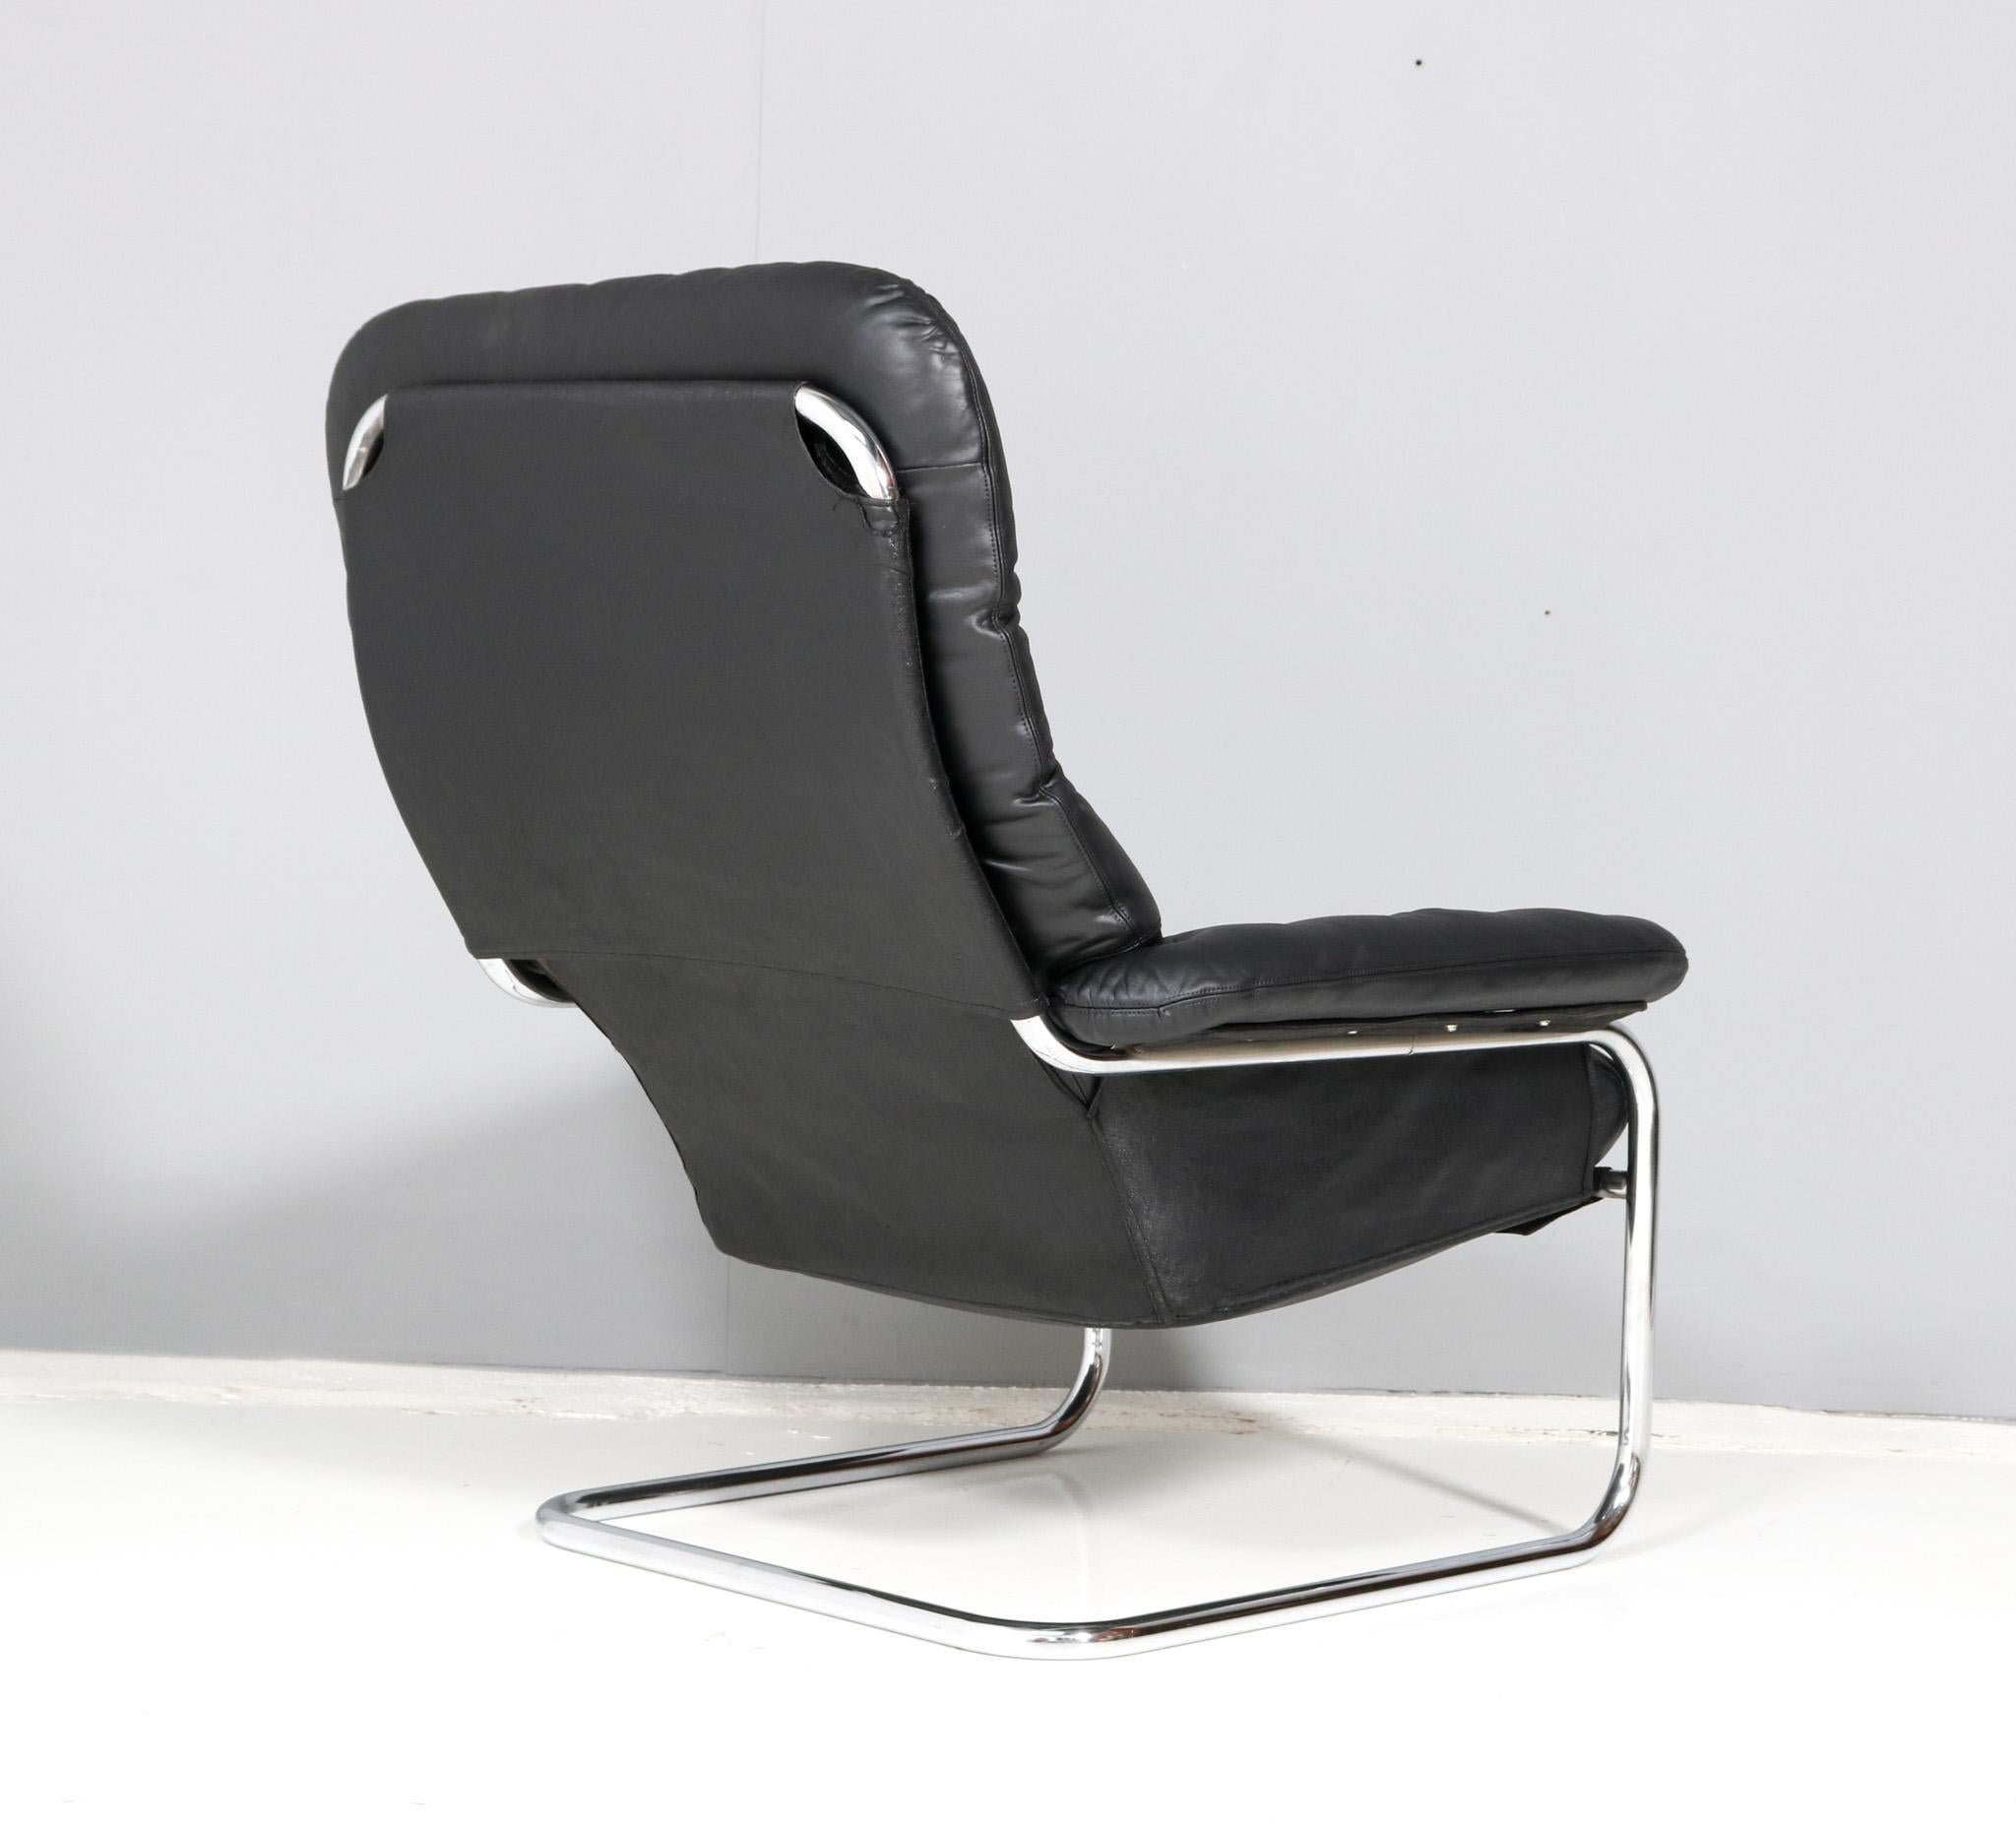 Leather Mid-Century Modern Cantilever Lounge Chair by Sam Larsson for Dux, 1972 For Sale